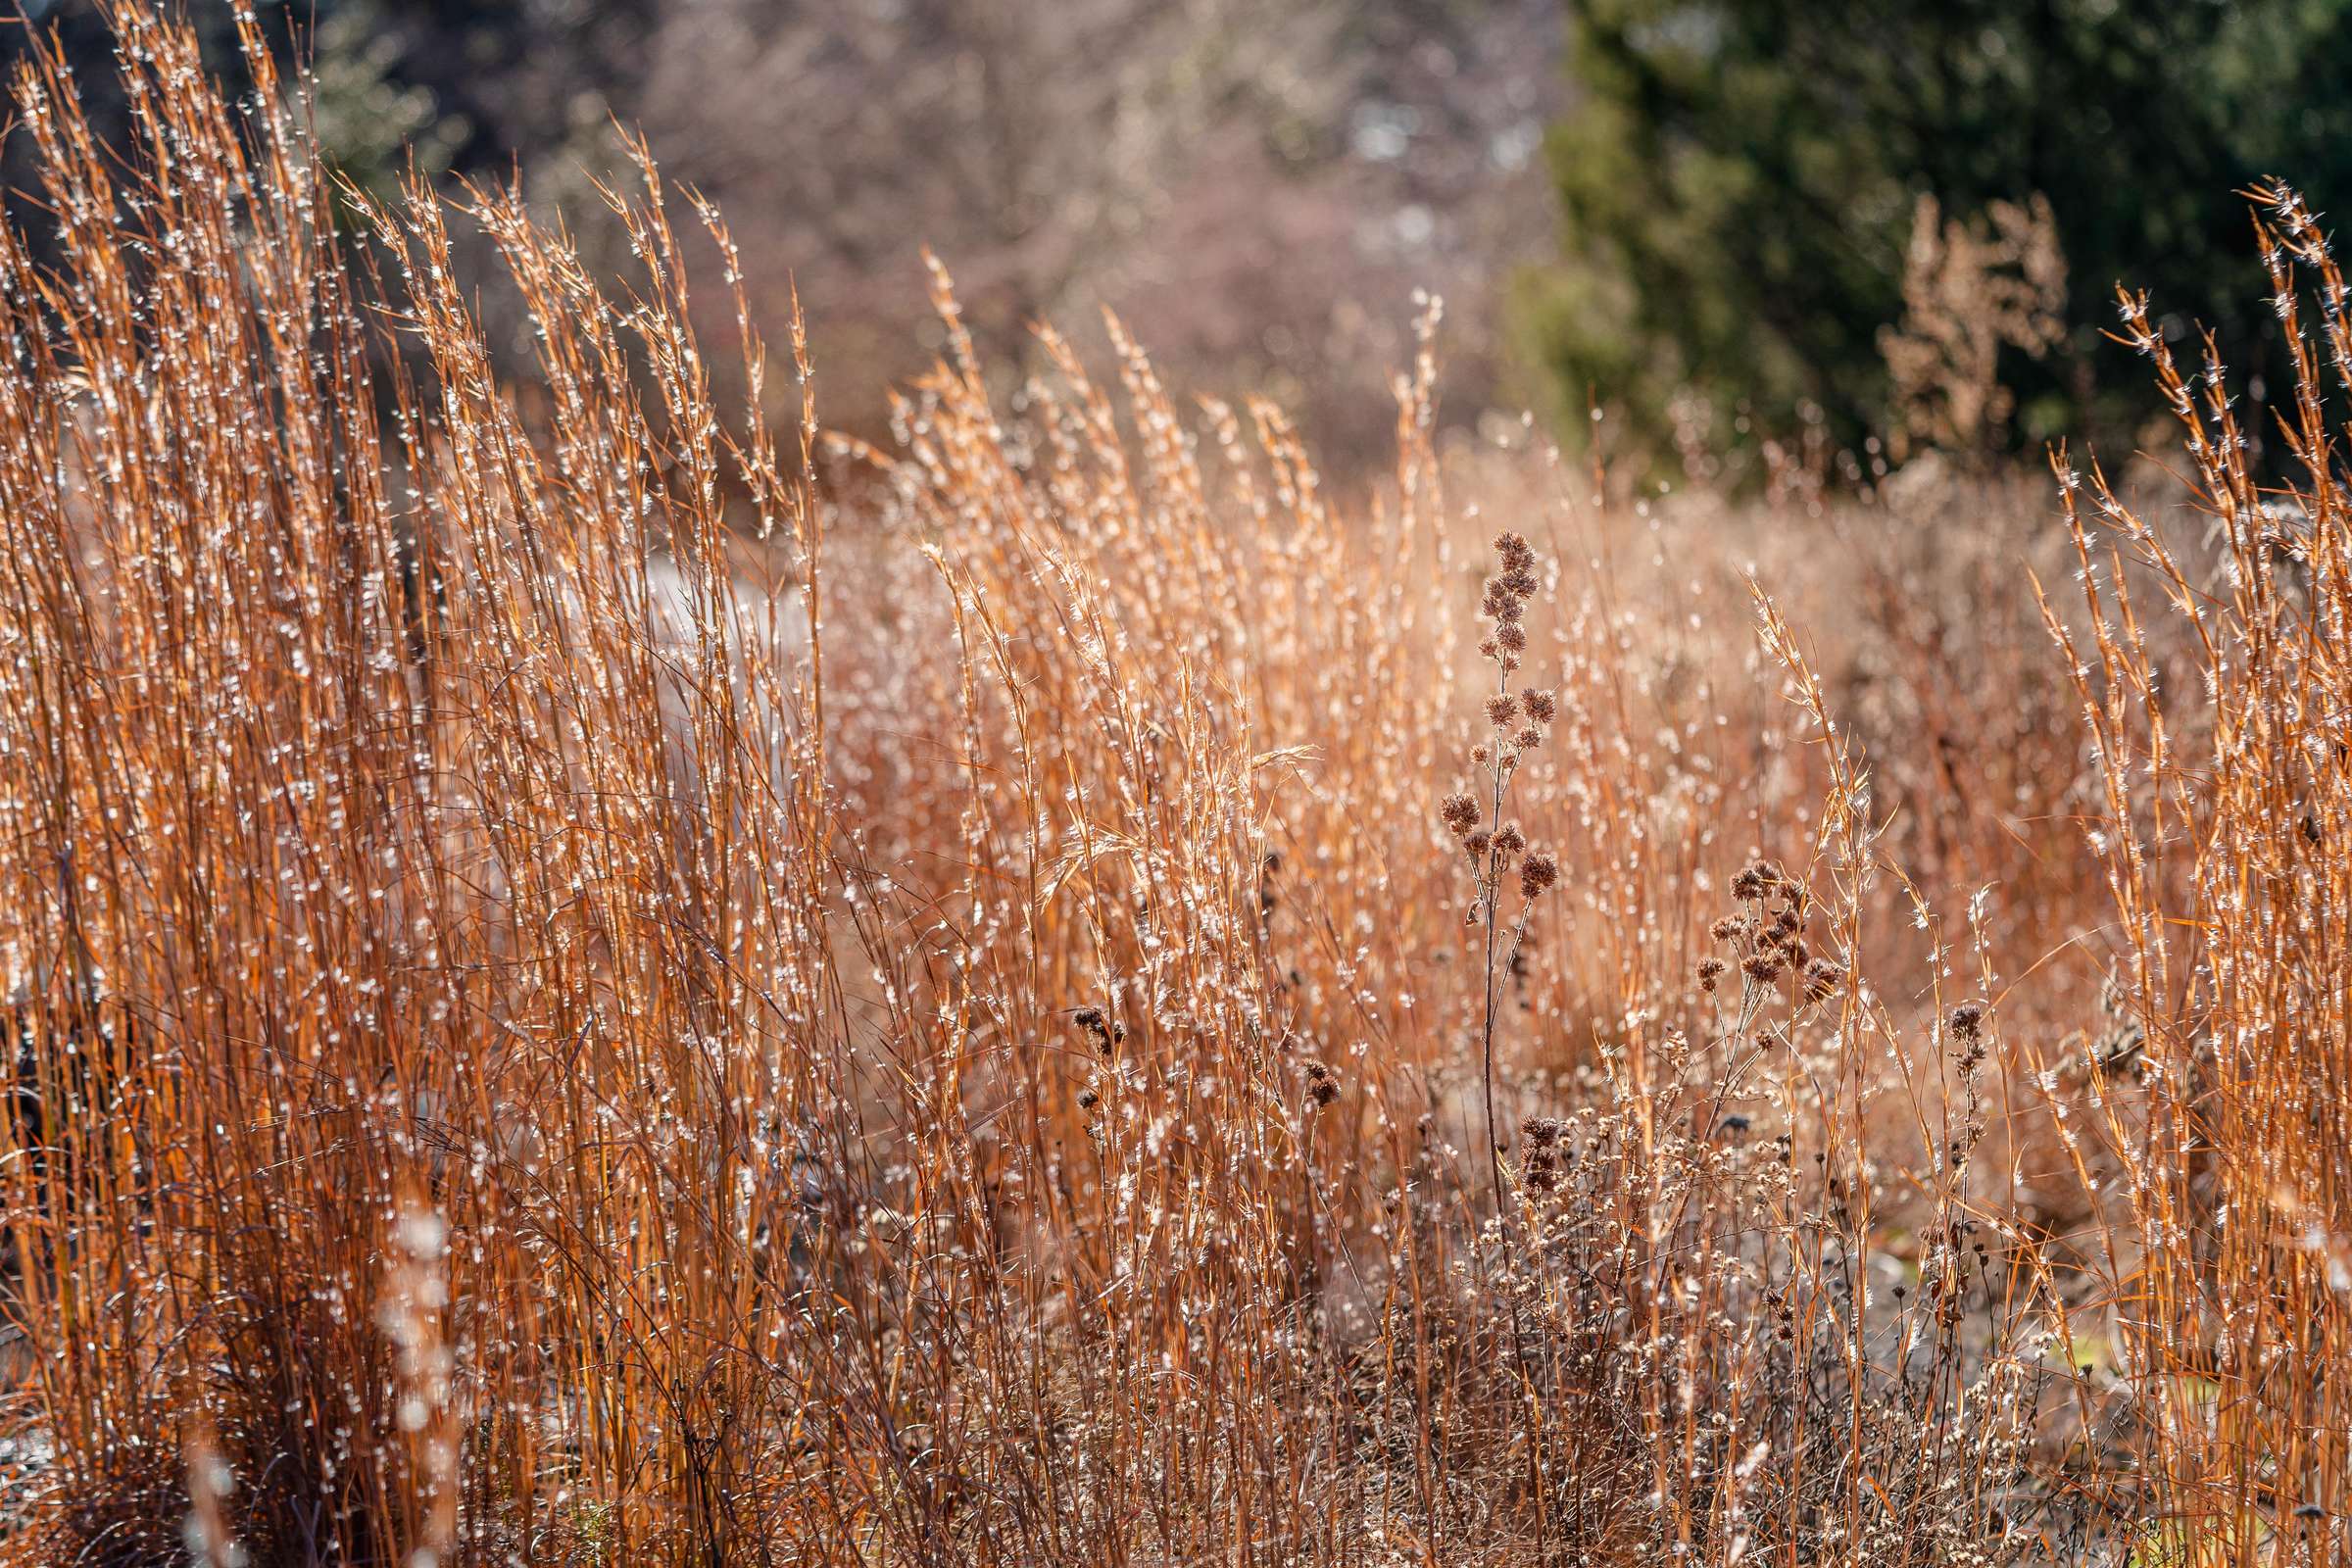 Tall, dry brown grasses wave in a breeze